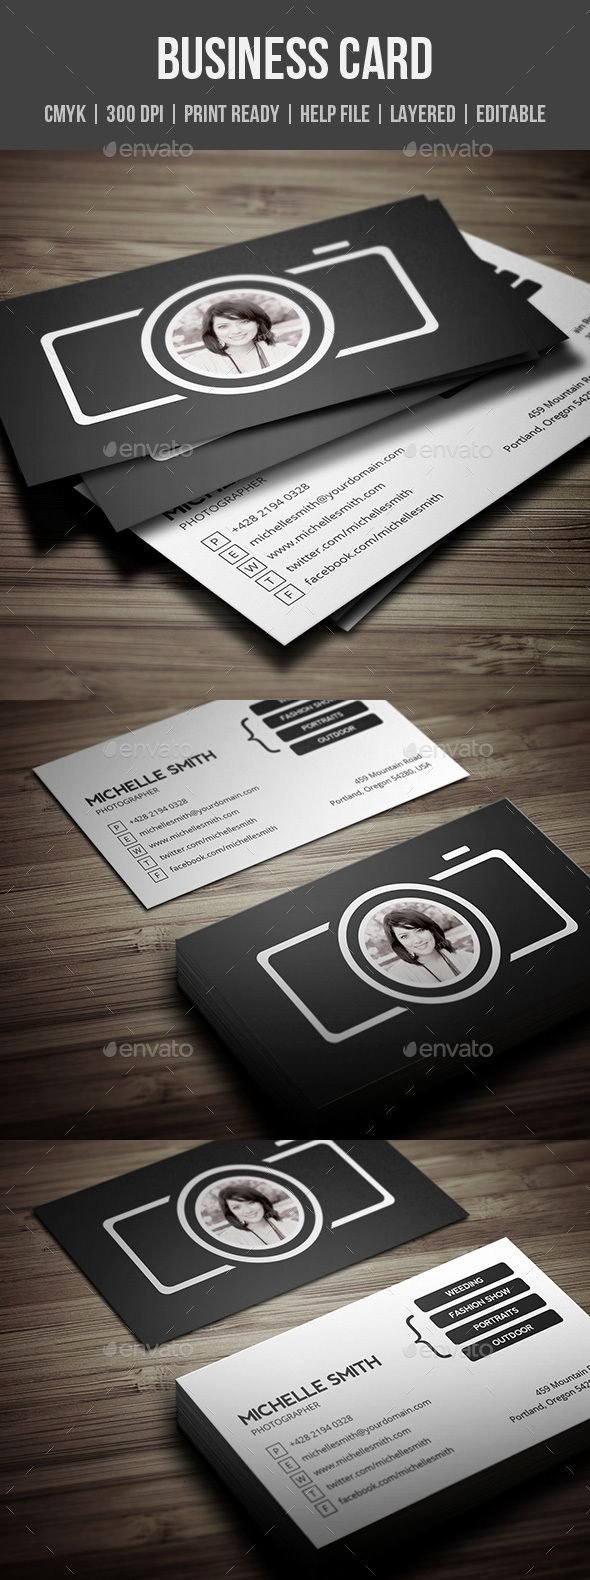 25 Best Ideas About Grapher Business Cards On